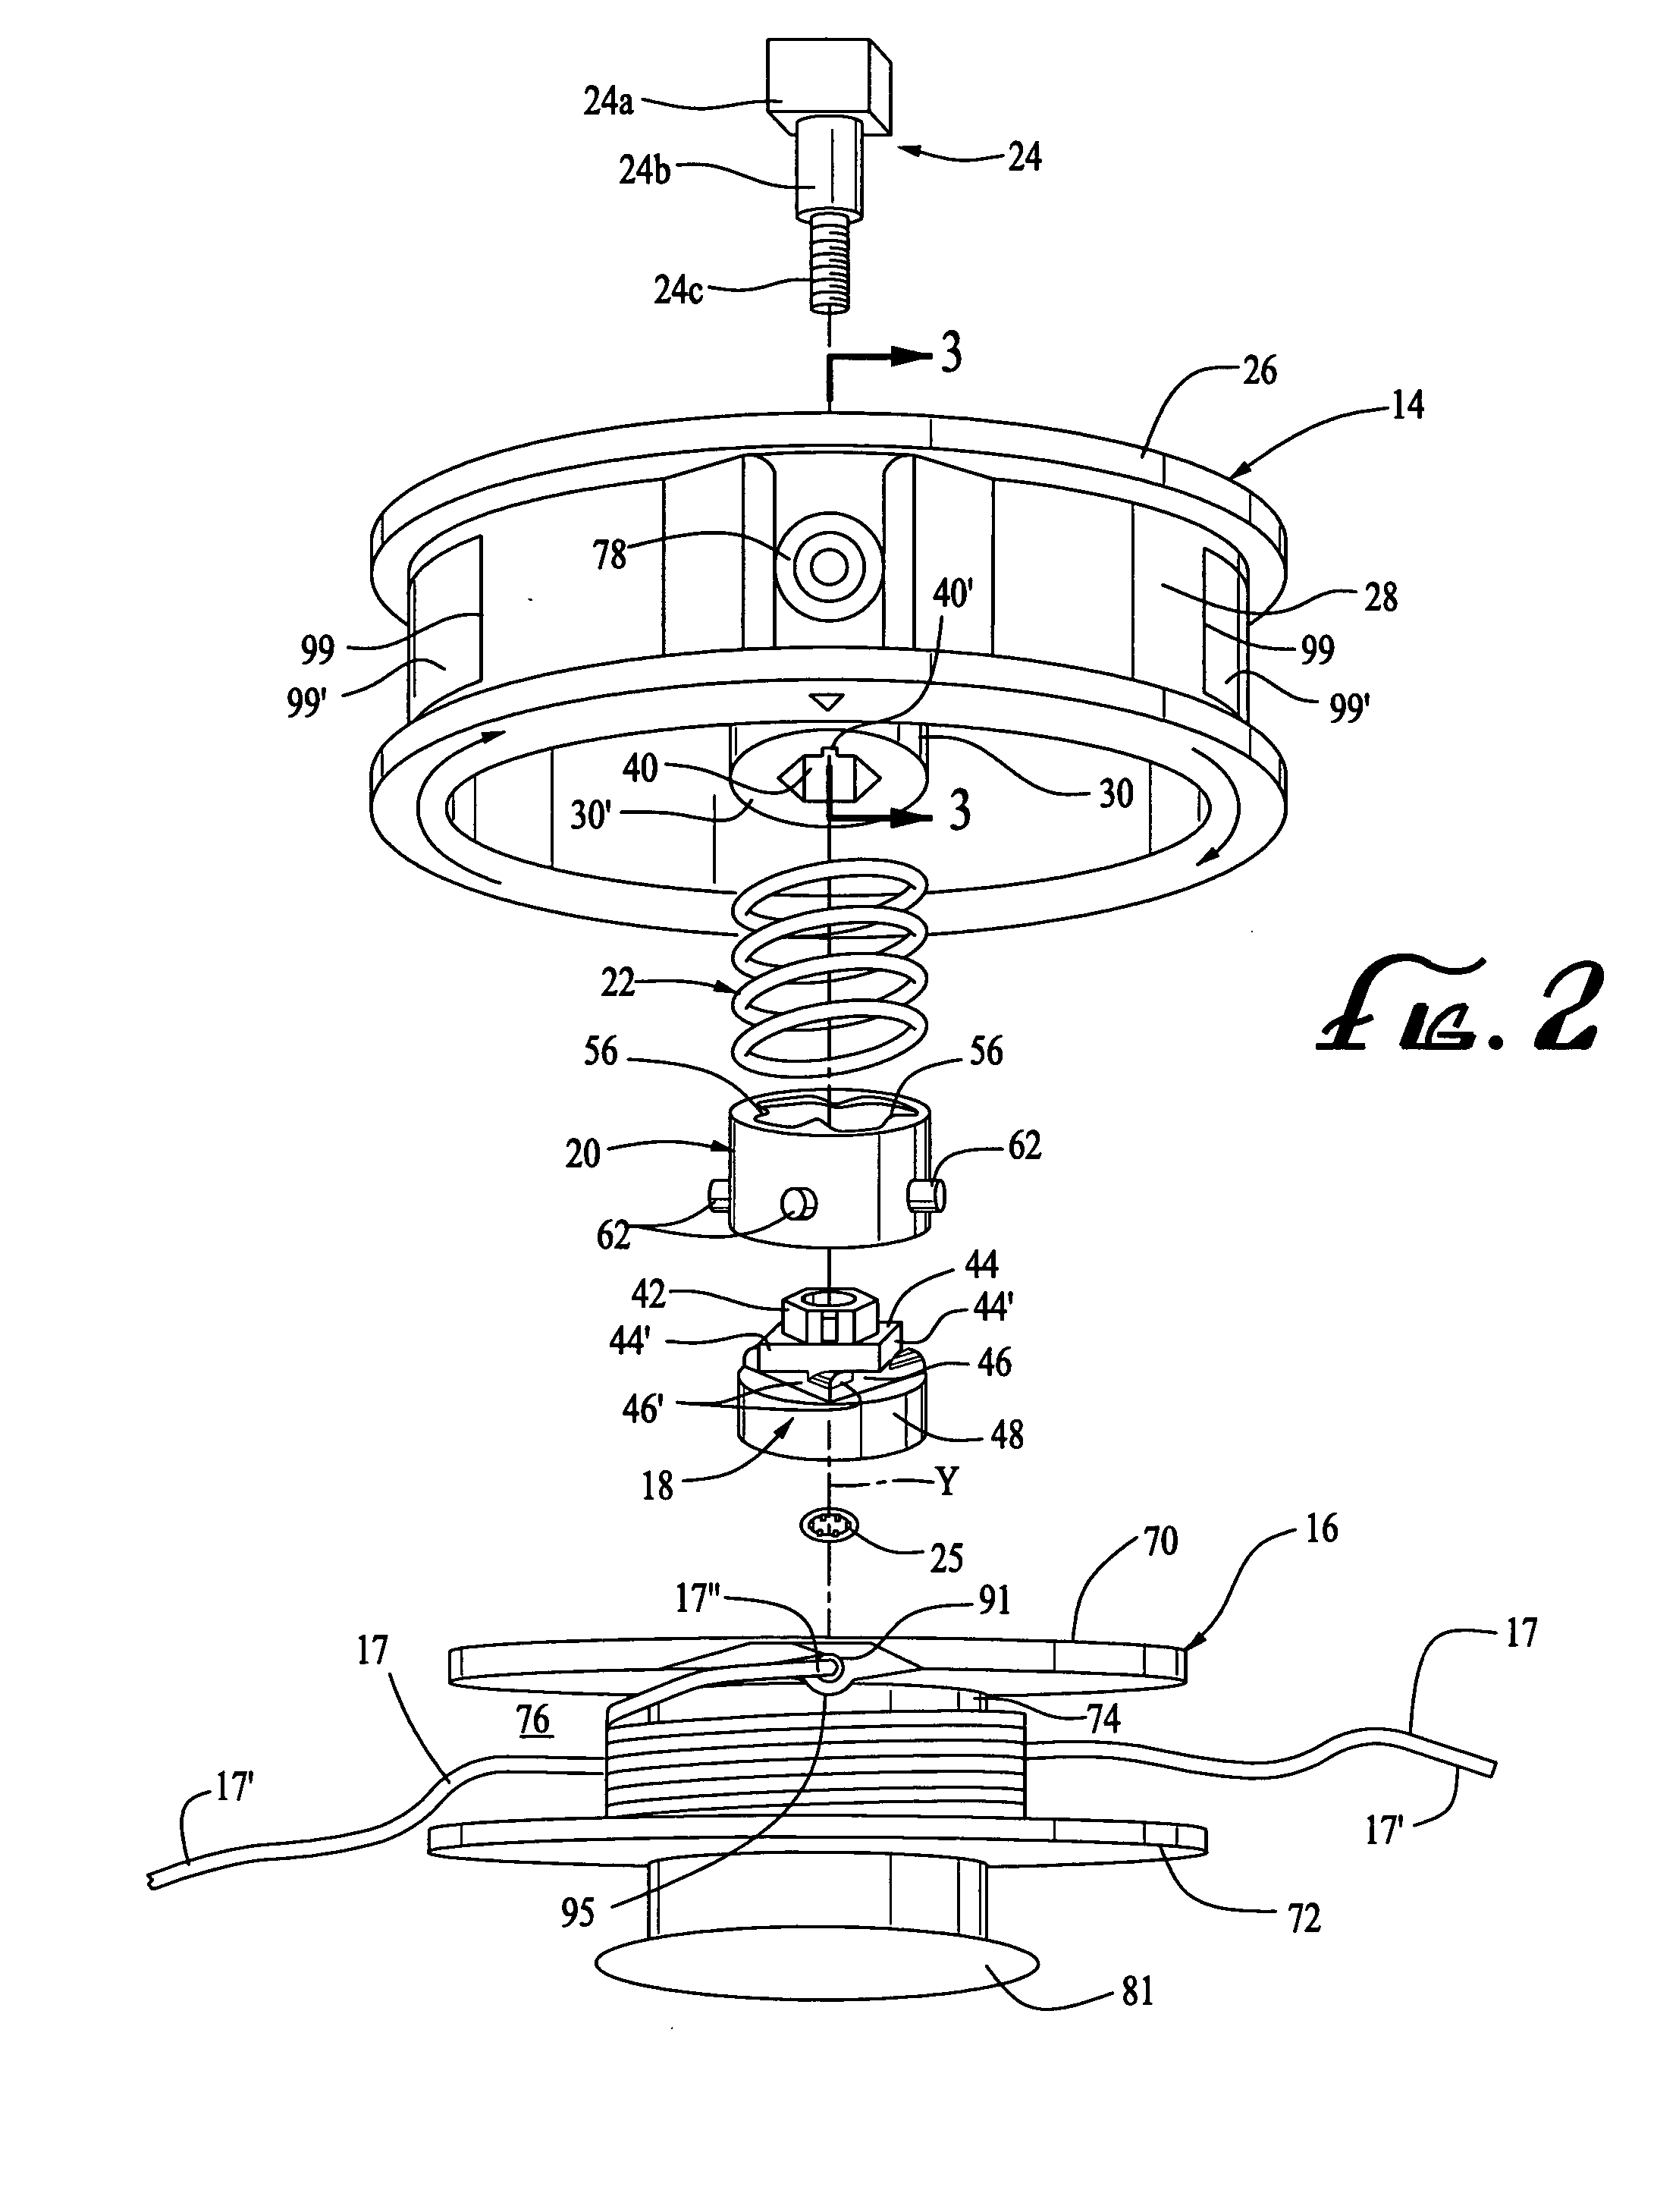 Trimmer head for use in flexible line rotary trimmers having improved line loading mechanism